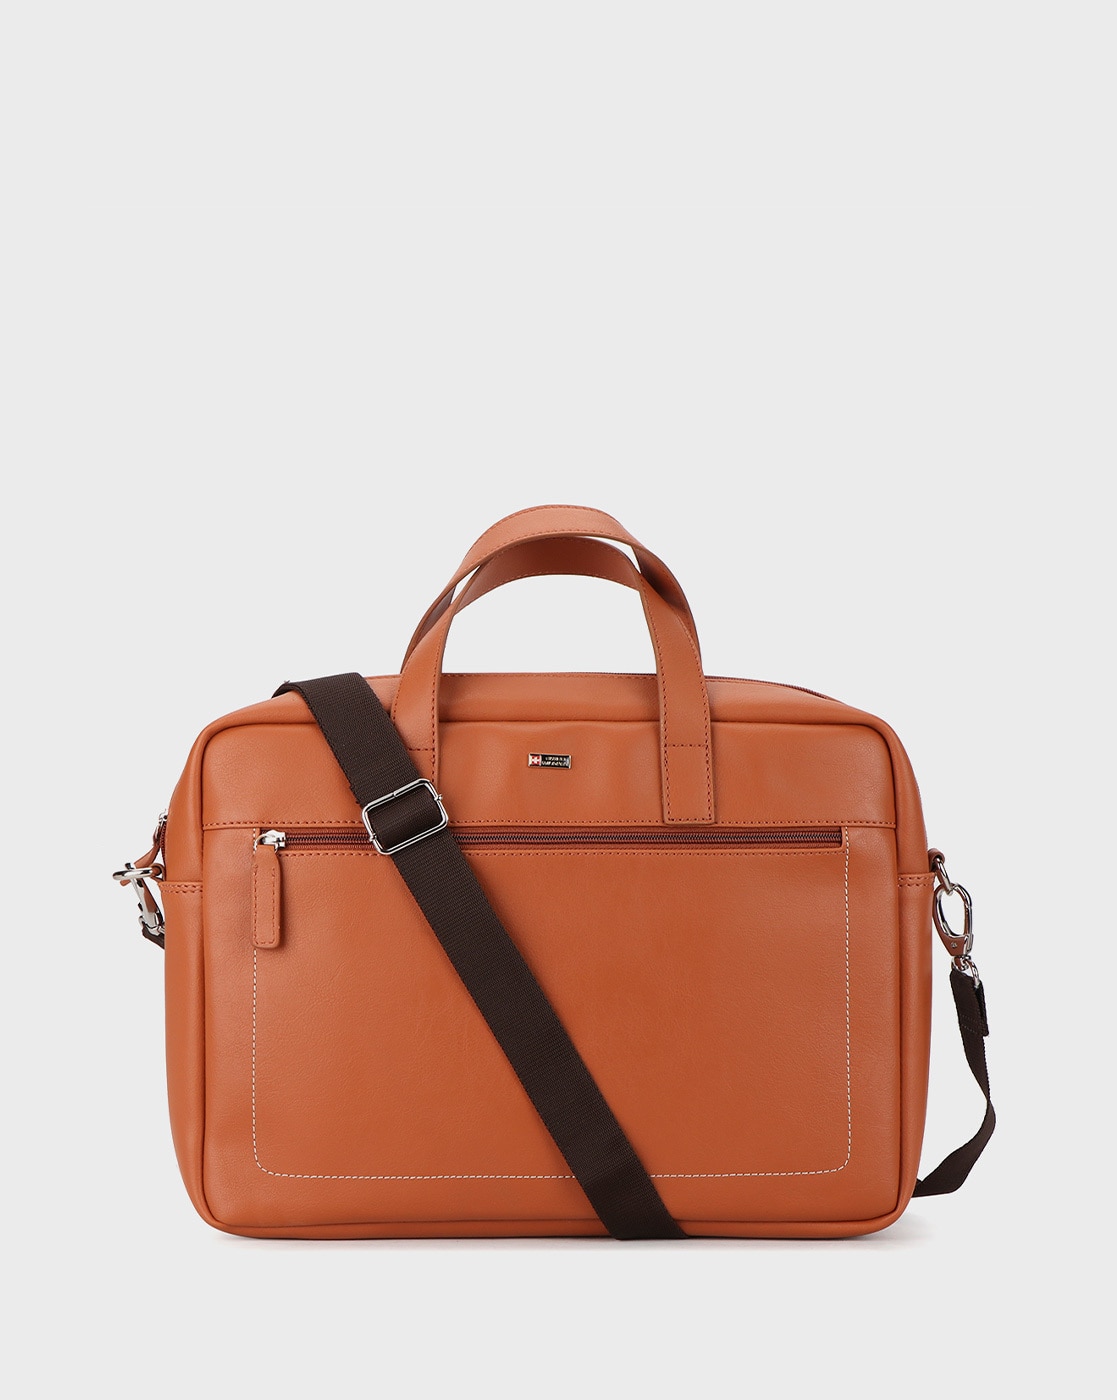 Bags for Men - 25 Trendy and Stylish Models For All Needs!